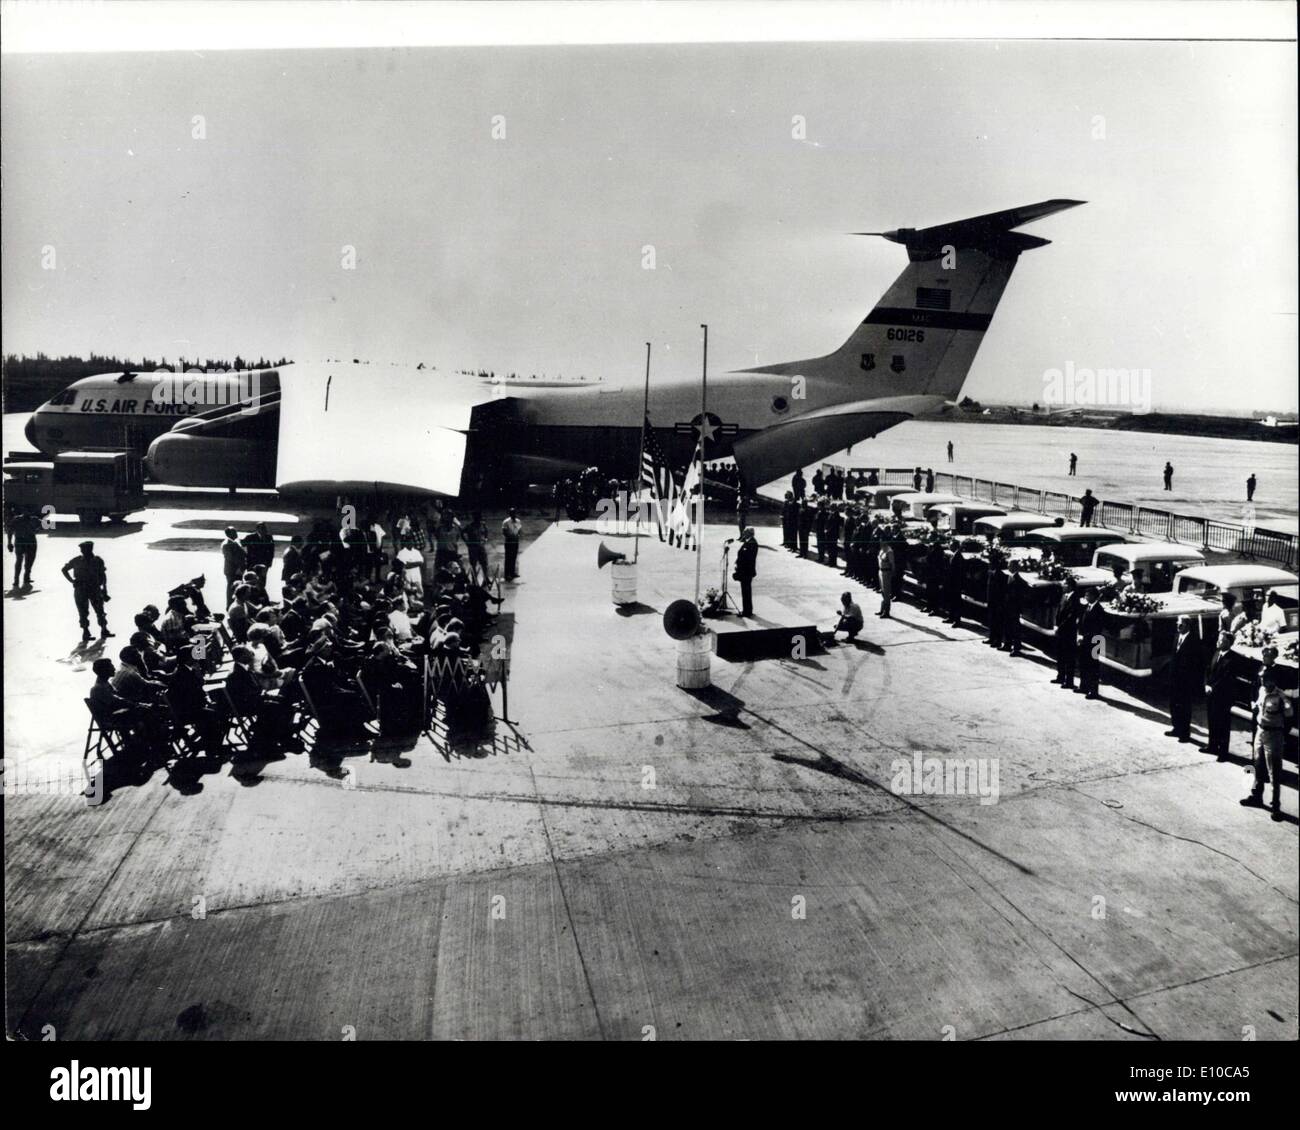 Jun. 07, 1972 - Victims of Tel Aviv Airport Attack Flown to Puerto Rico: This was the scene at Lod Airport, Tel Aviv, when 16 aluminium coffins containing the bodies of Pilgrim victims of the terrorists attack recently were taken to Puerto-Rico by a U.S. air Force C-141 Starlifter. Stock Photo